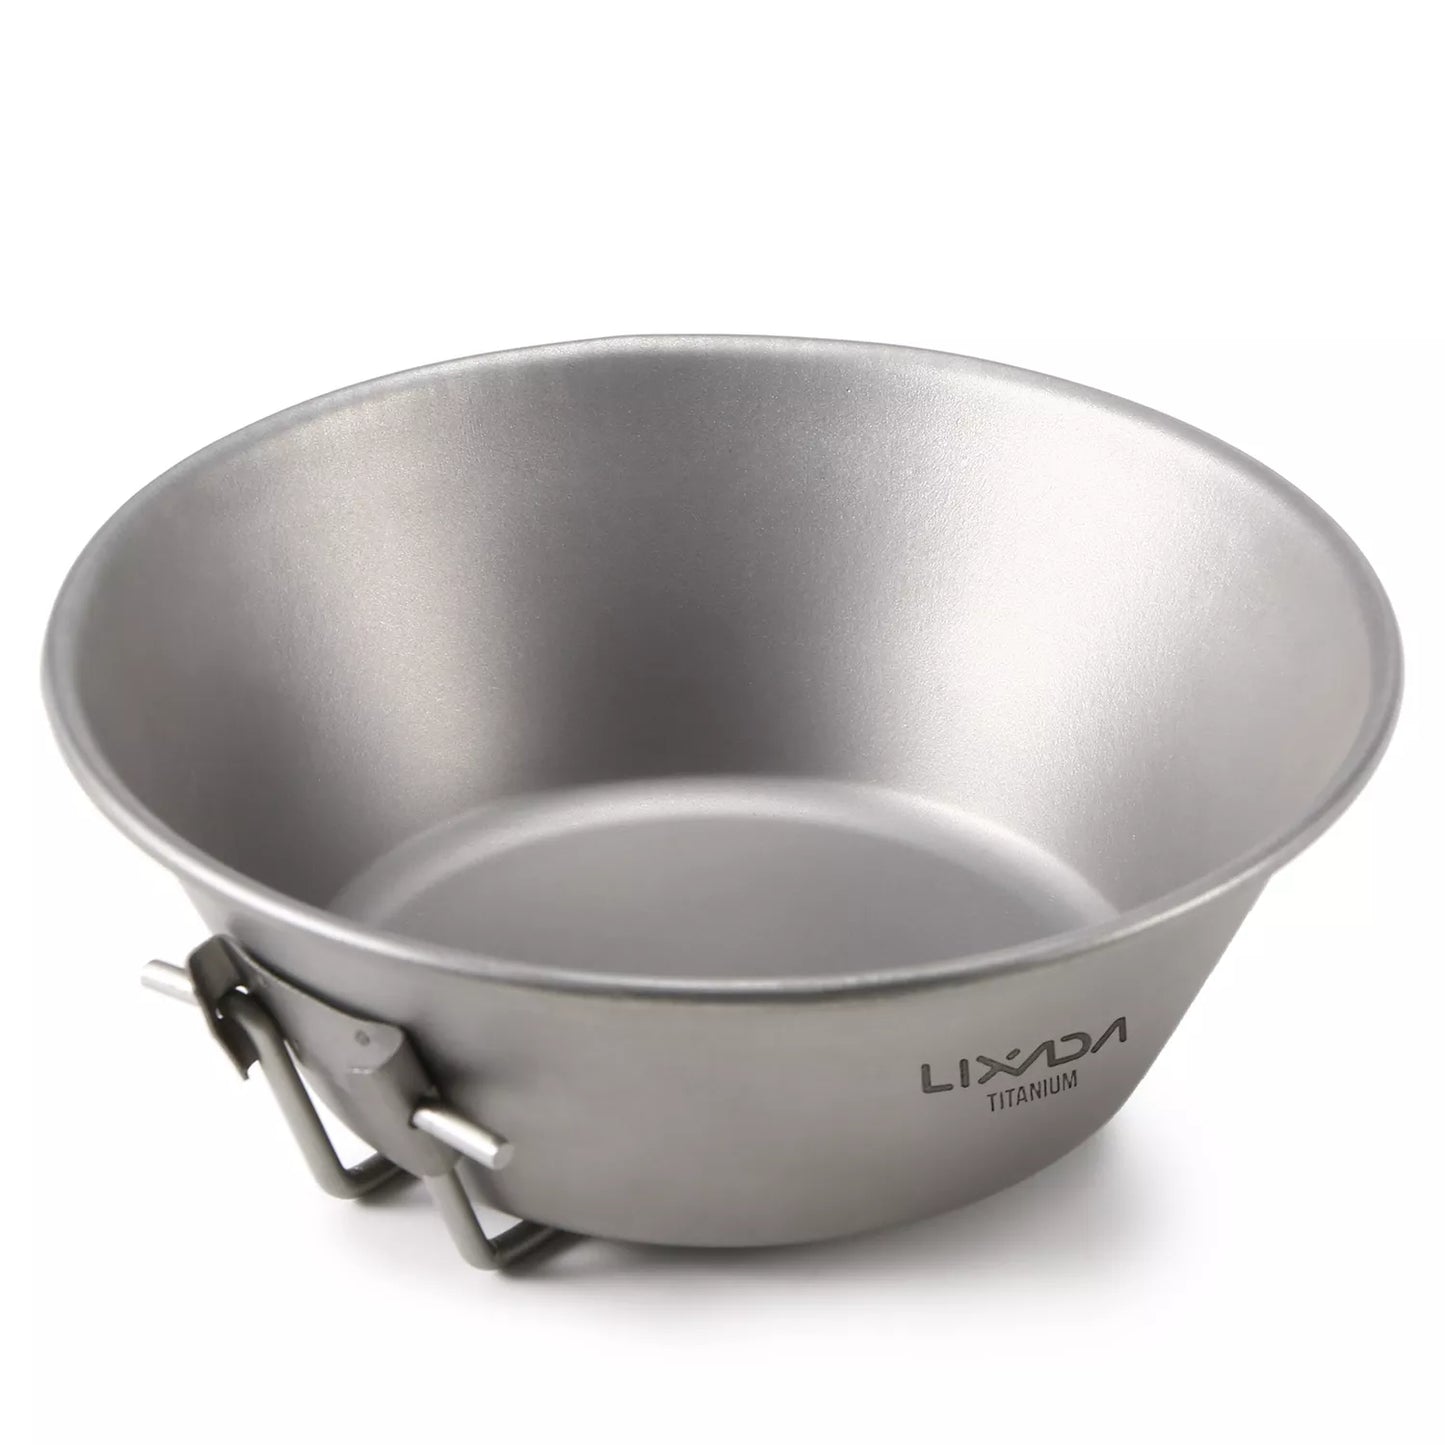 Ultralight Titanium Bowl Stainless Steel Bowl with Folding Handle for Outdoor Camping Hiking Backpacking Picnic BBQ Cooking